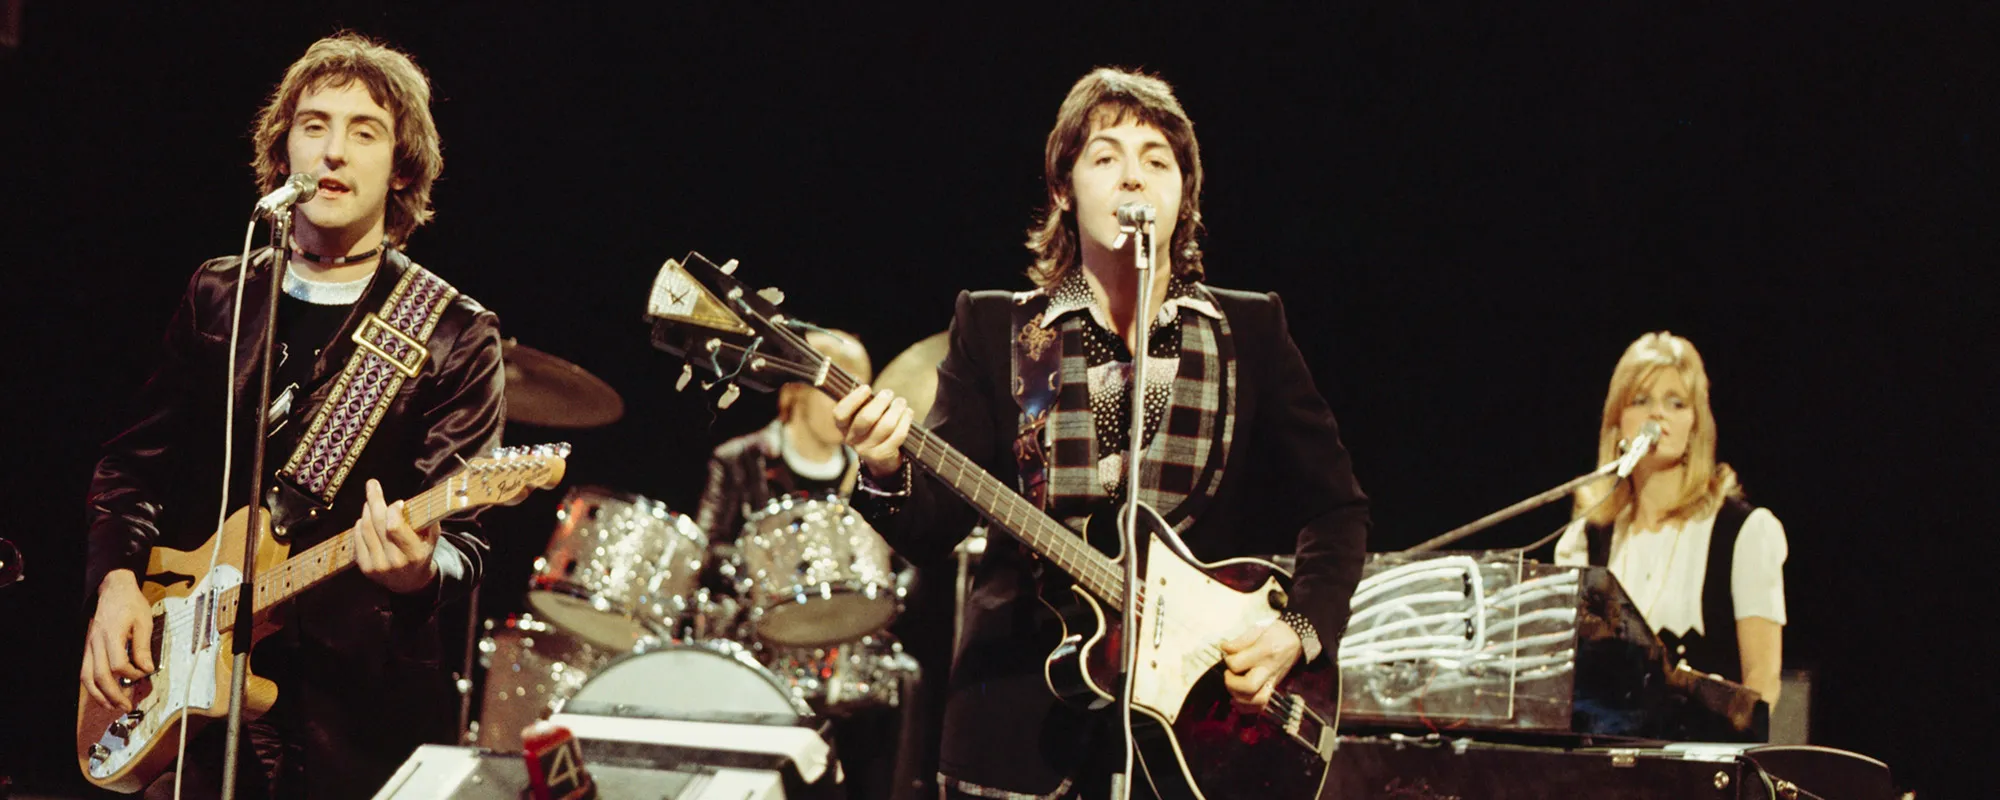 3 Wings Songs That Denny Laine Wrote with Paul McCartney